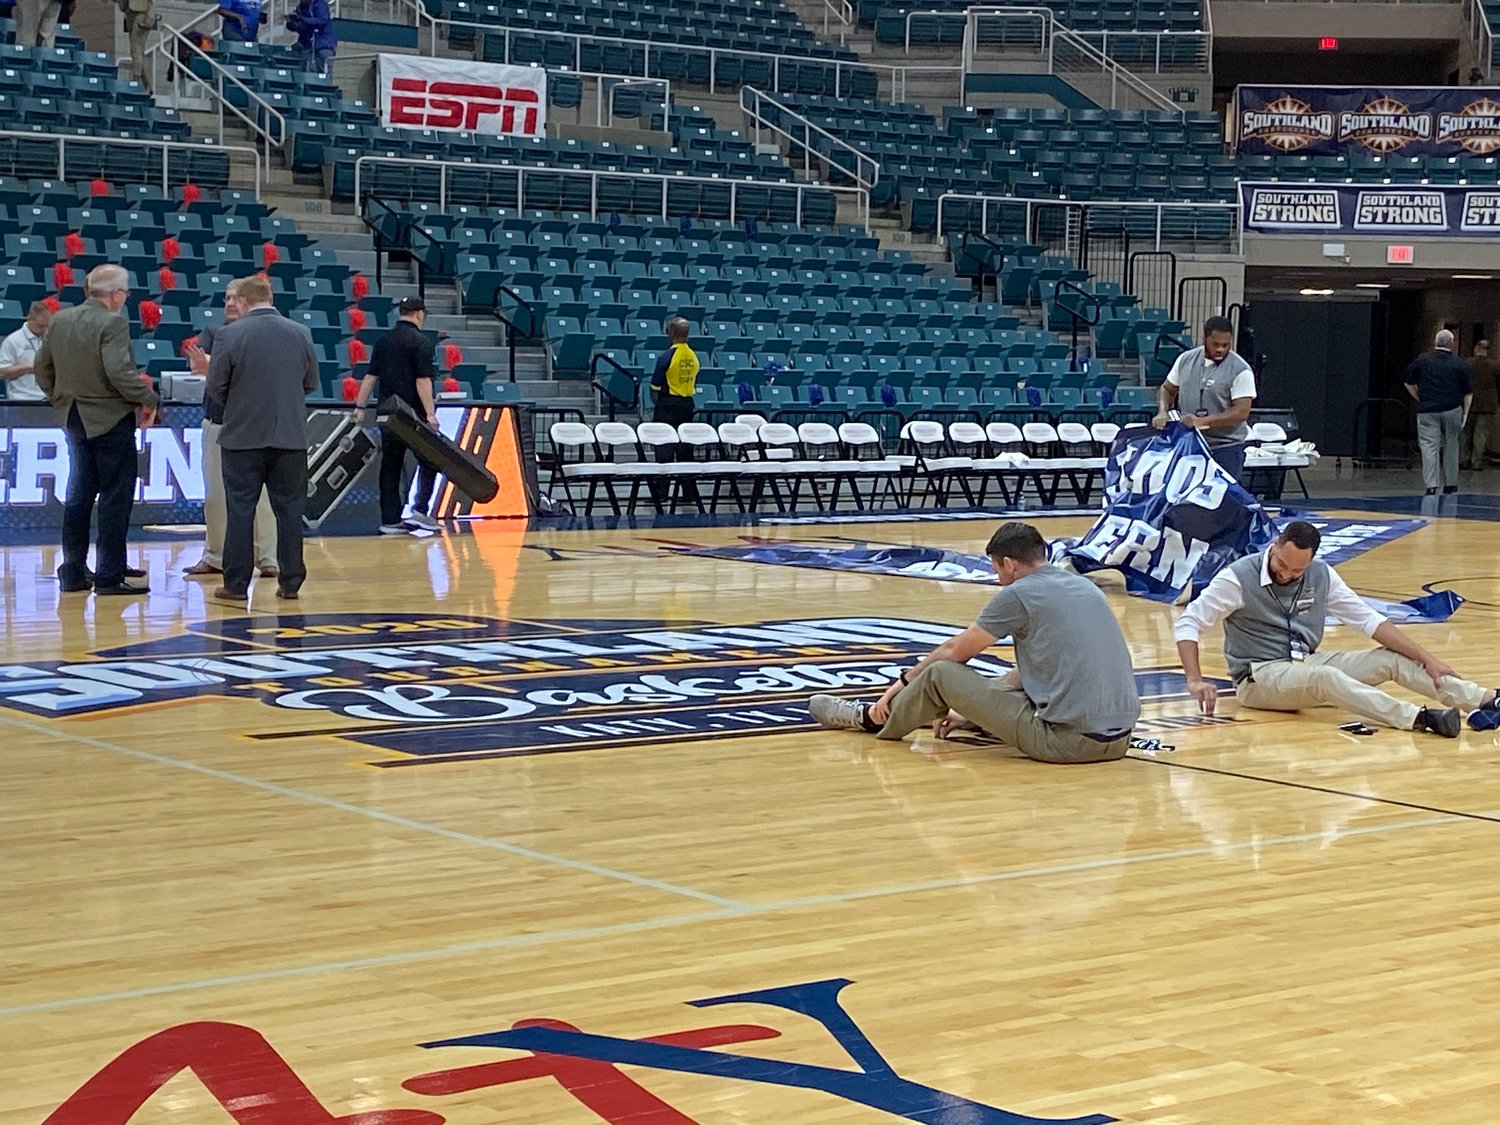 Southland Conference employees tear up floor logos promoting the tournament at the Merrell Center.